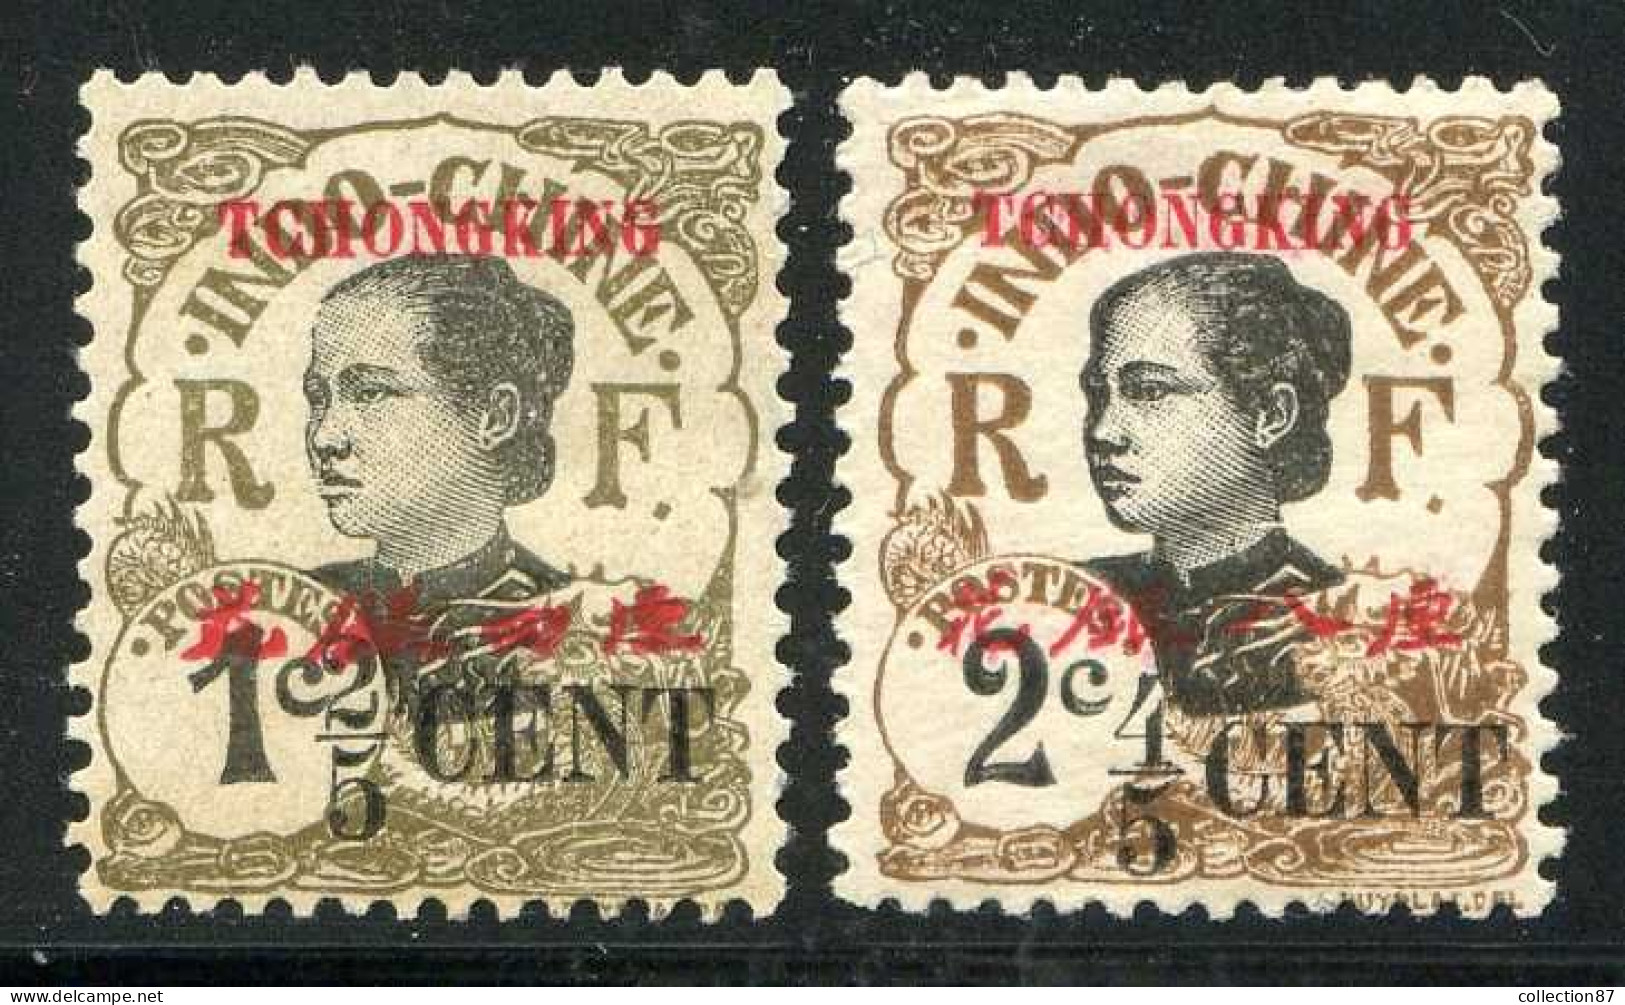 Réf 82 > TCH'ONG K'ING < N° 82 + 83 * Neuf Ch. - MH * --- Tchong King - Unused Stamps